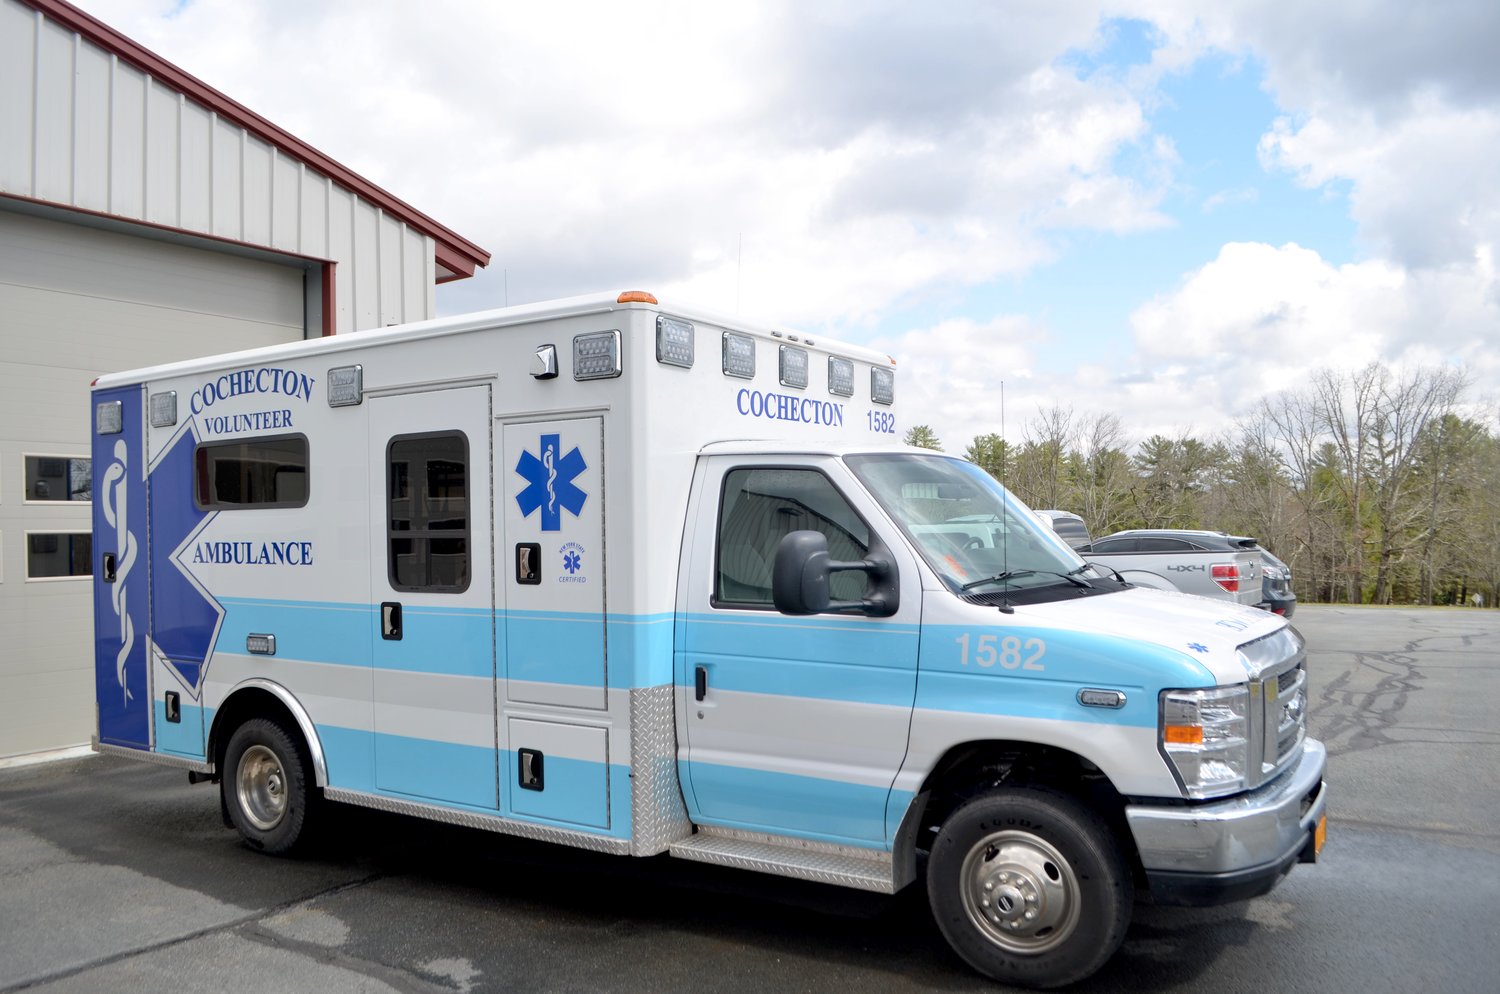 The Cochecton Volunteer Ambulance is looking for dedicated individuals to join its ranks and help provide essential EMS services to our rural area.